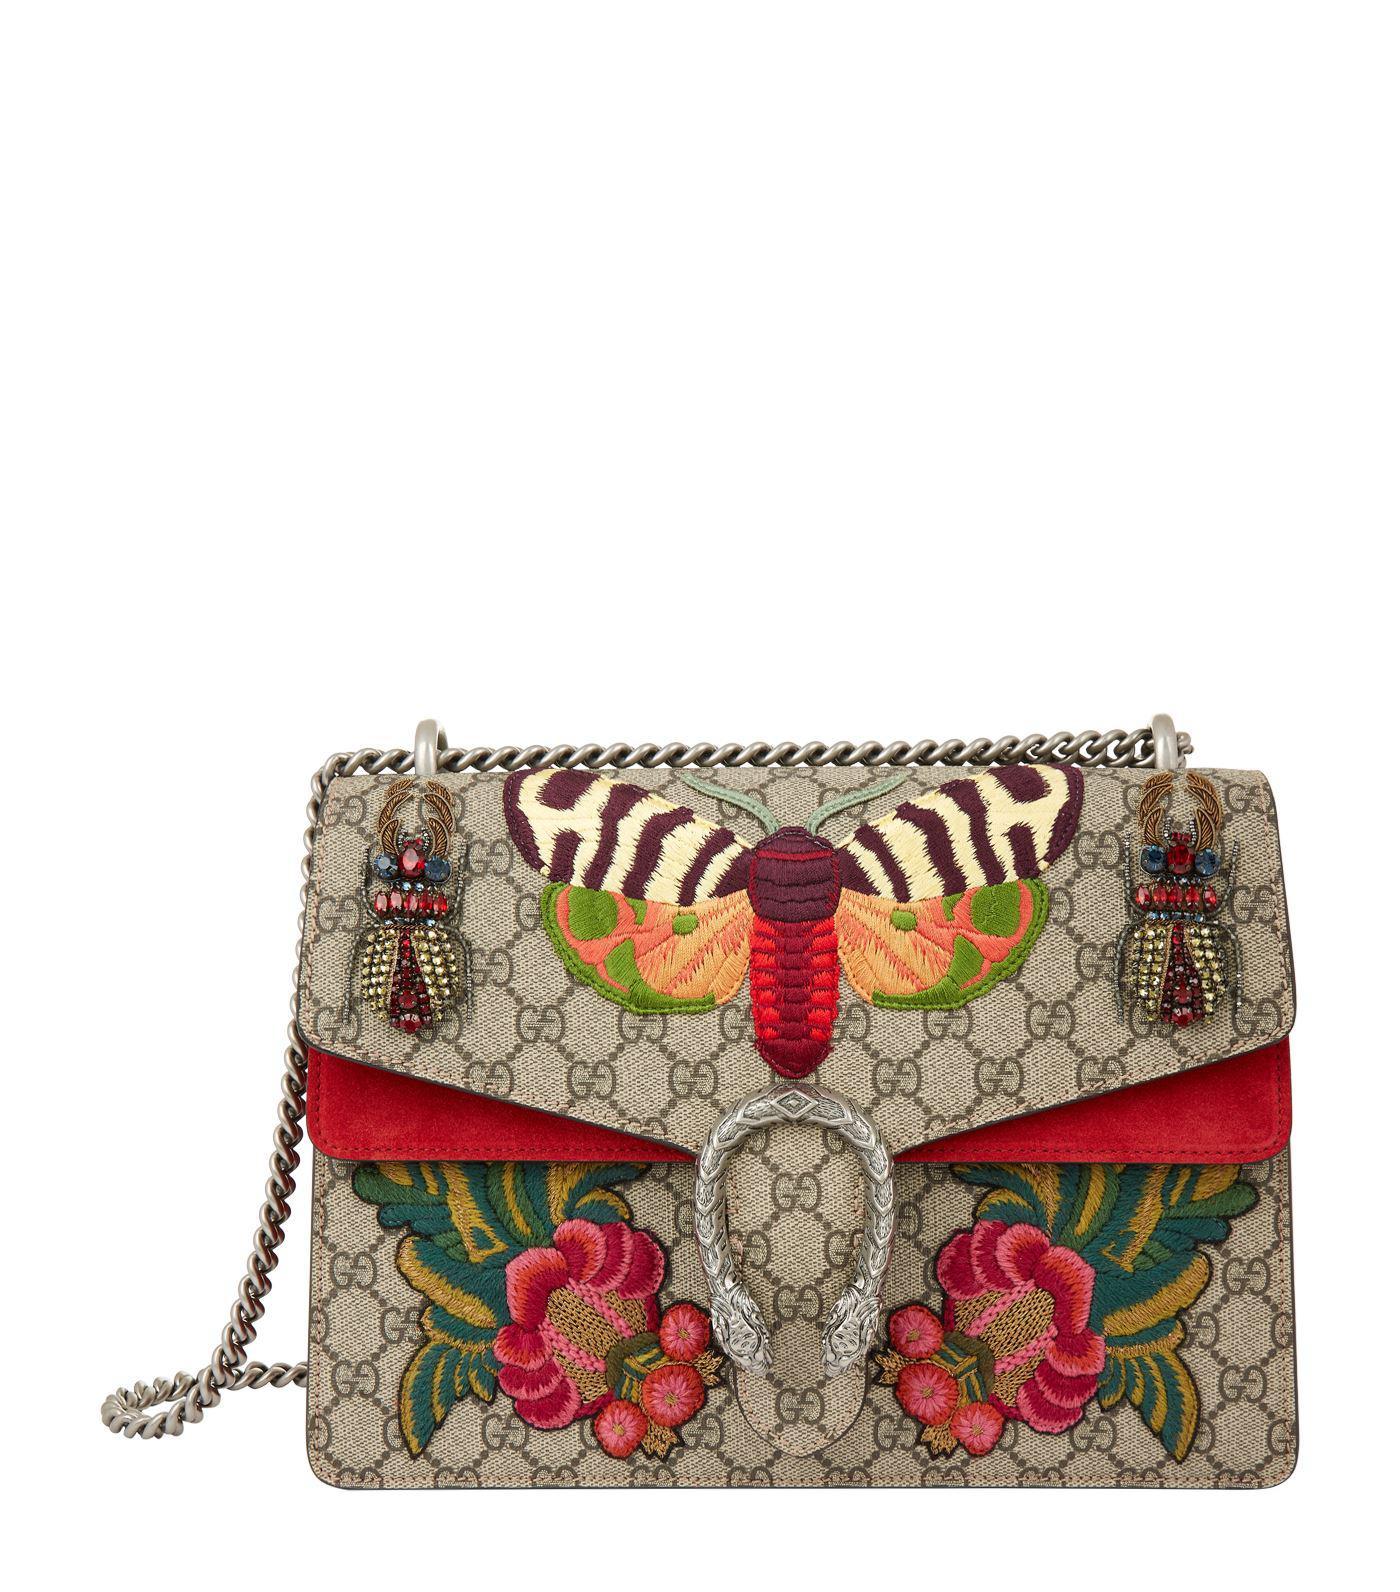 Gucci Canvas Large Emboidered Dionysus Bag, White, One Size - Lyst